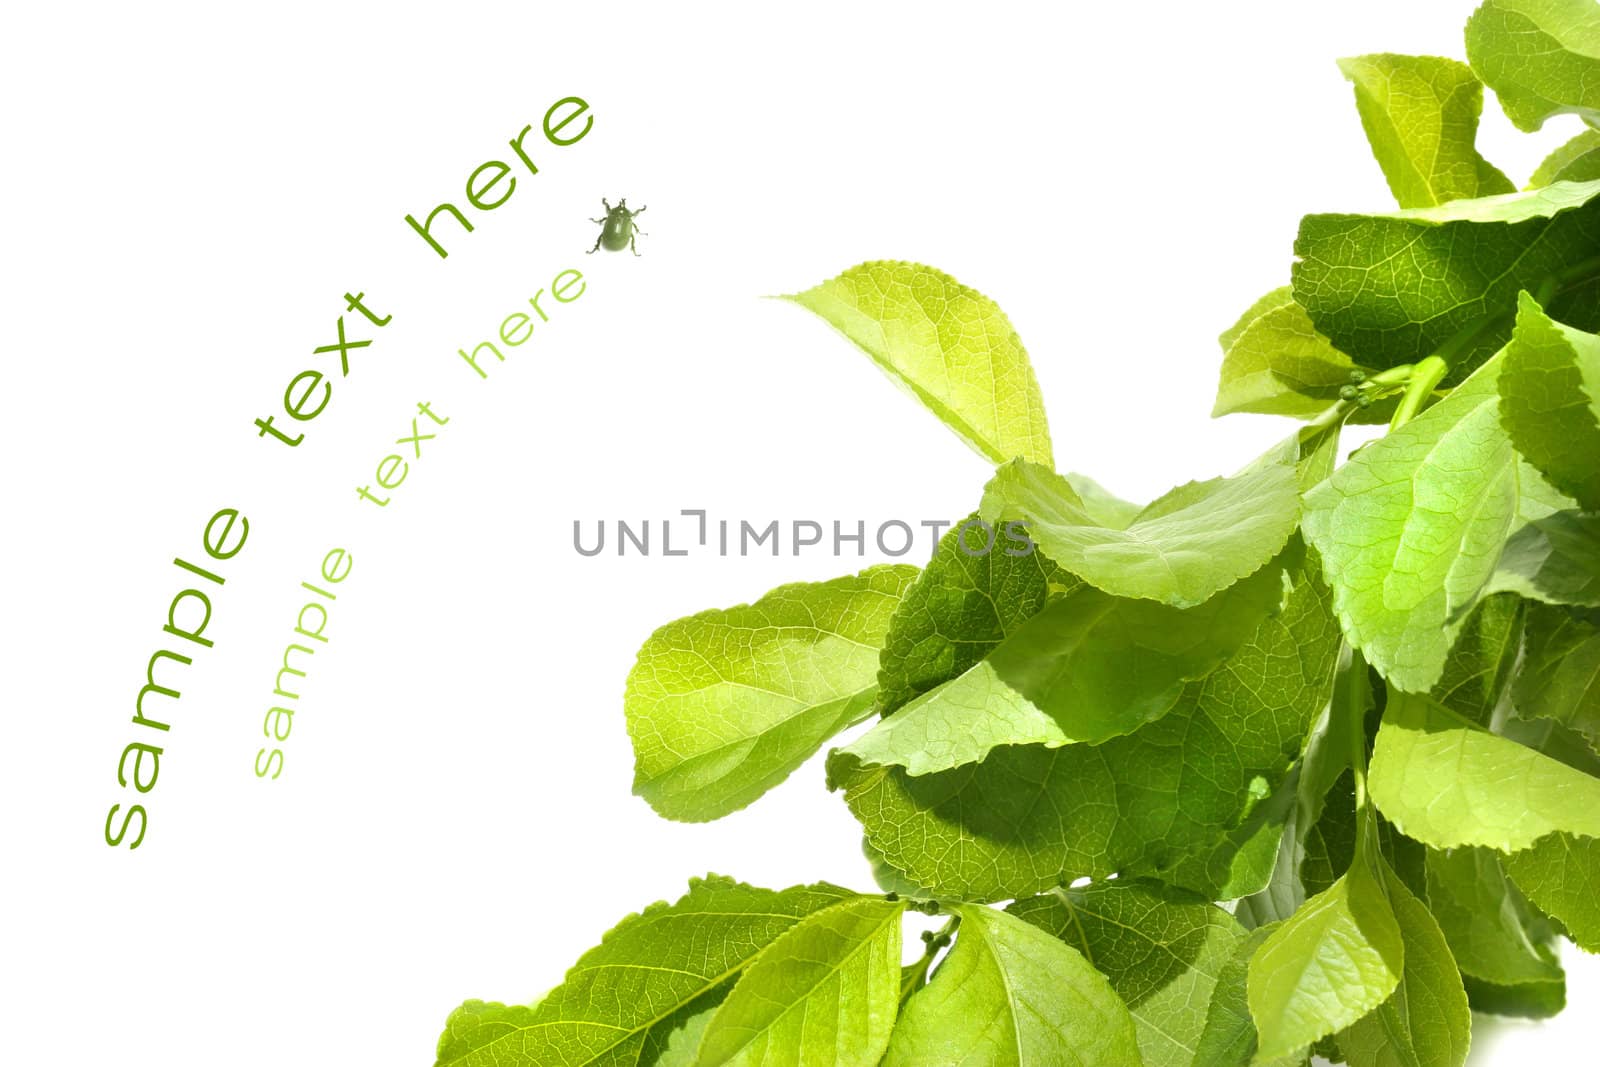 Green foliage against white background